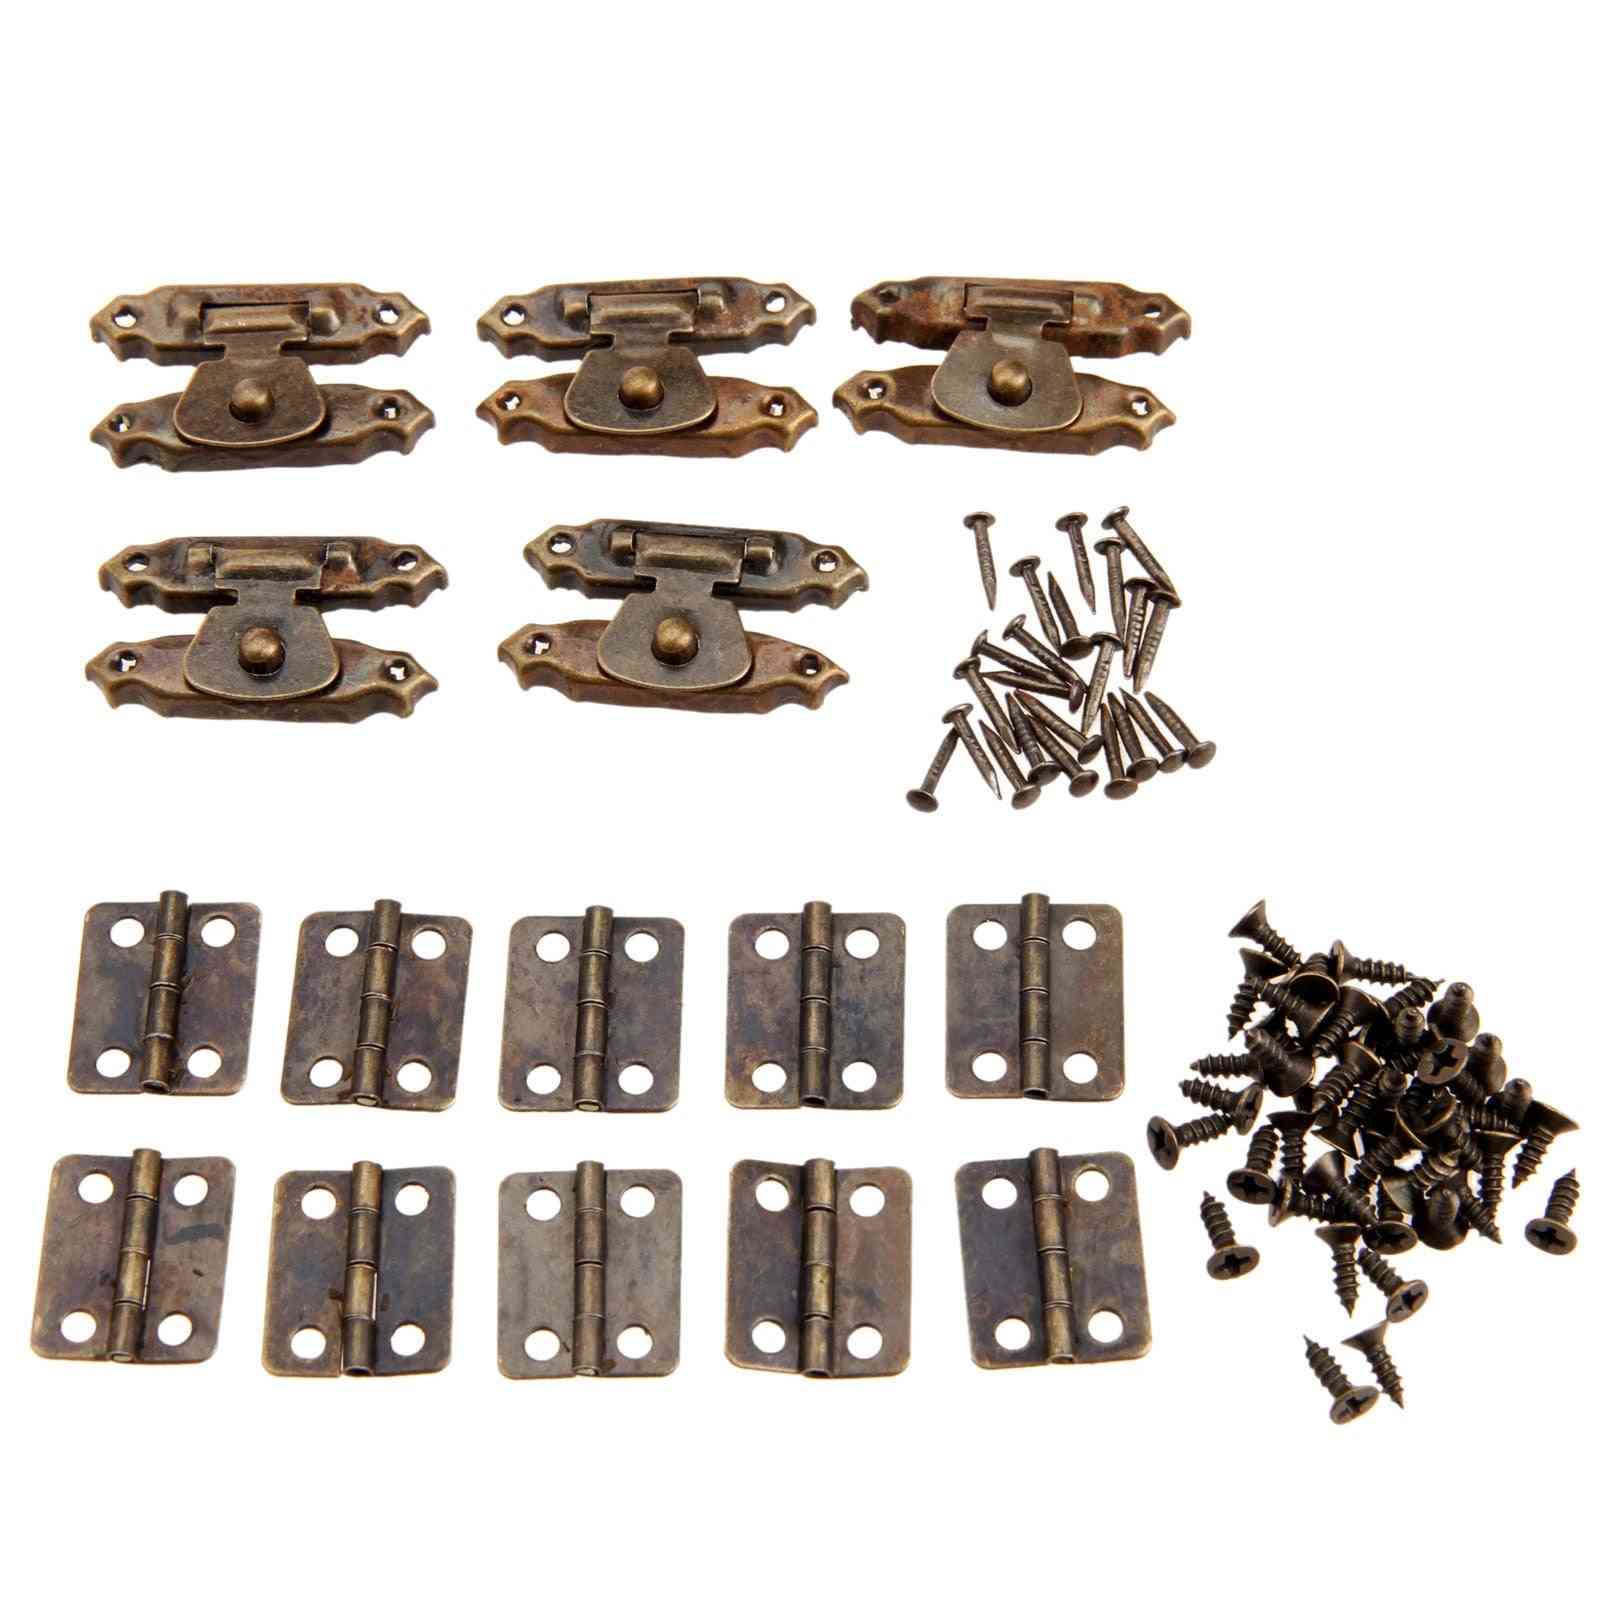 Antique Style Iron Decorative Hinges With Vintage Lock Latch Hasps Screws And Nails